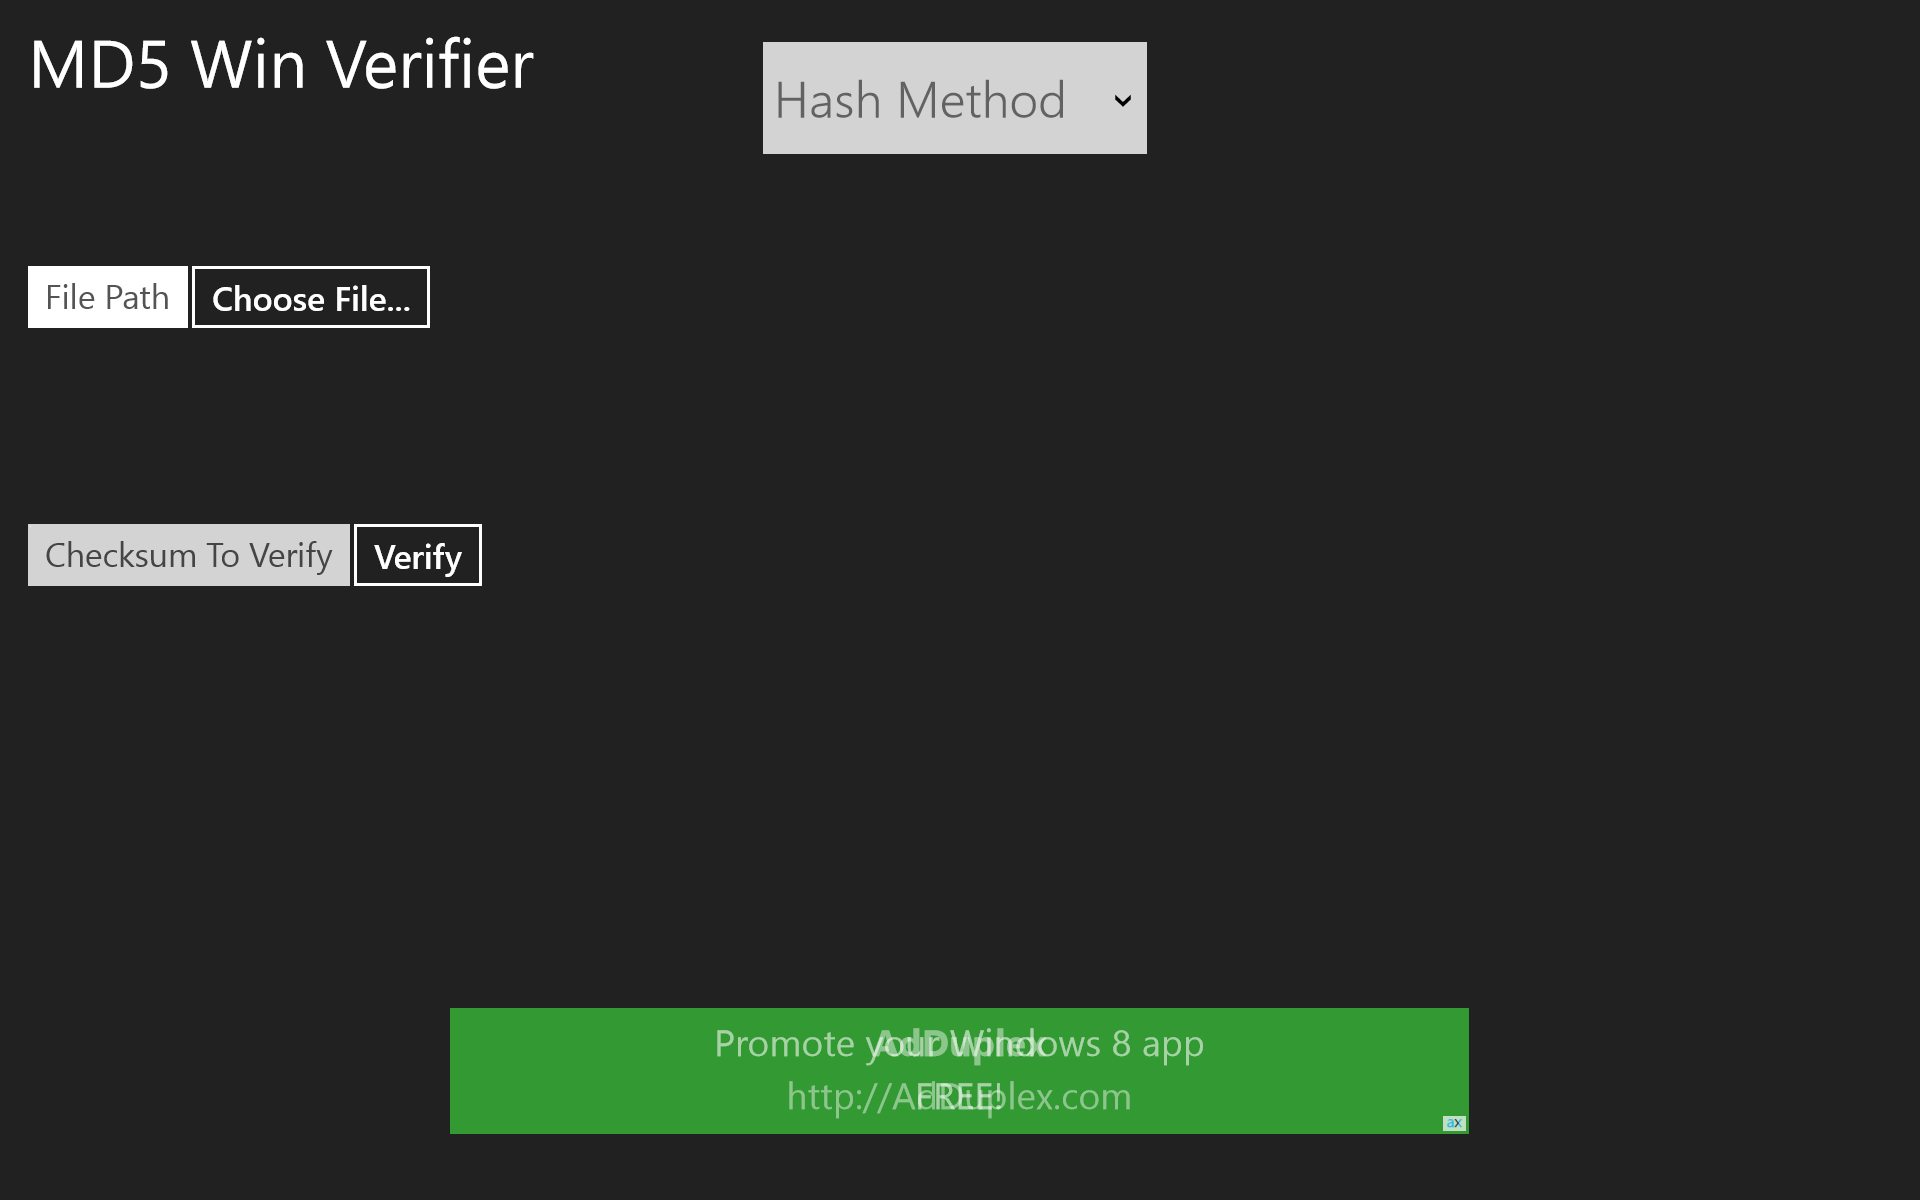 Verify Screen. User can choose the file whose checksum has to be verified